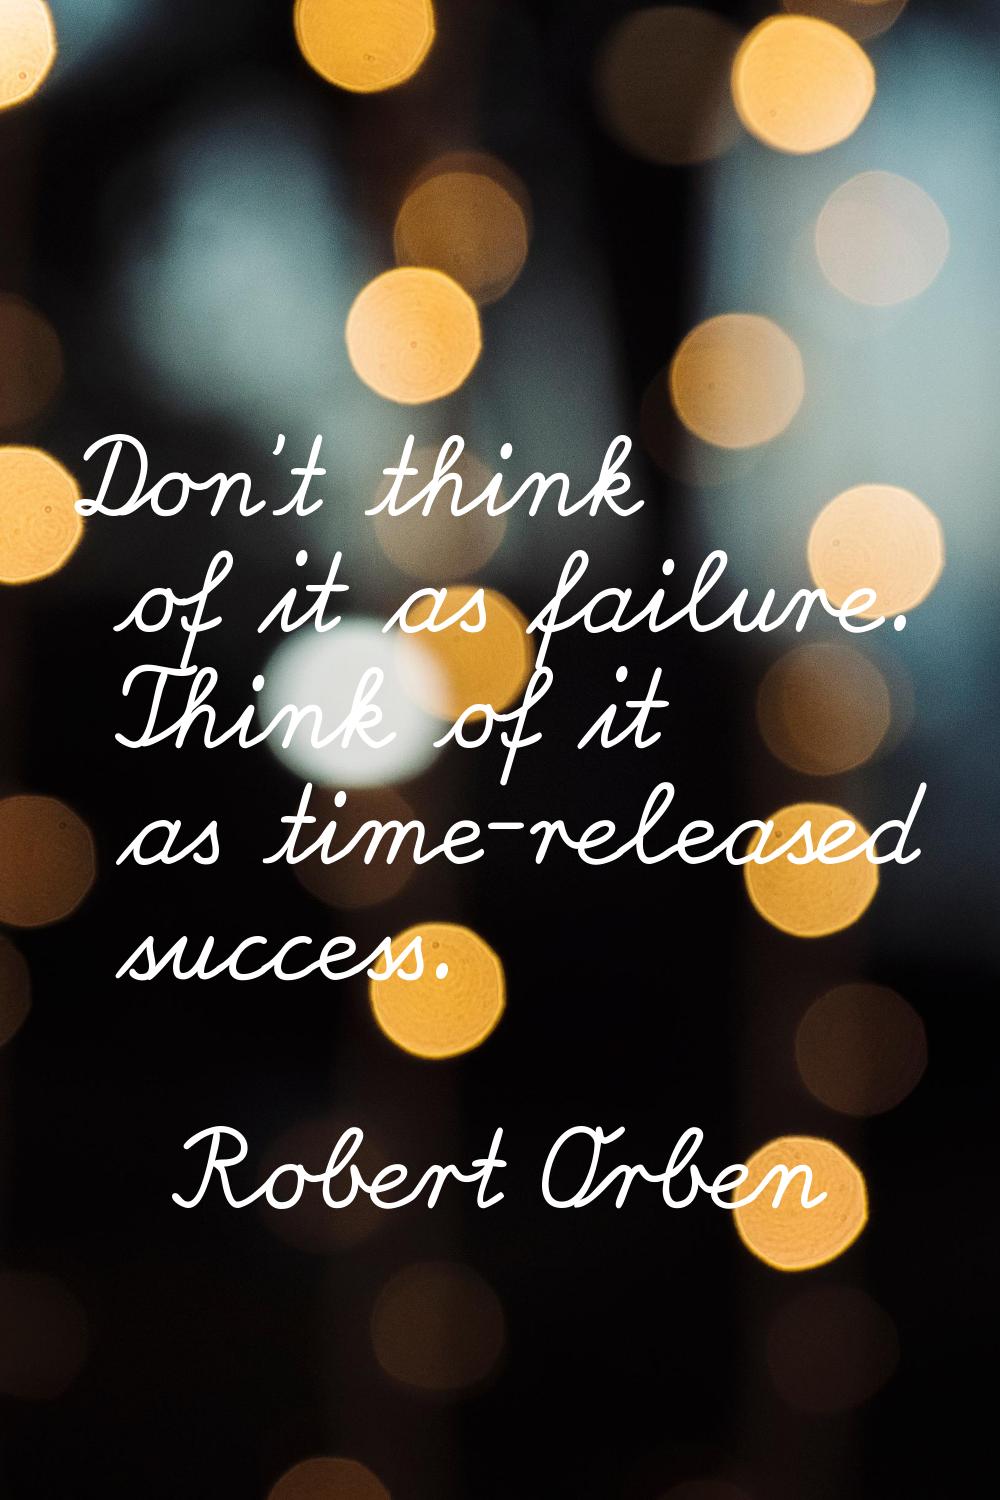 Don't think of it as failure. Think of it as time-released success.